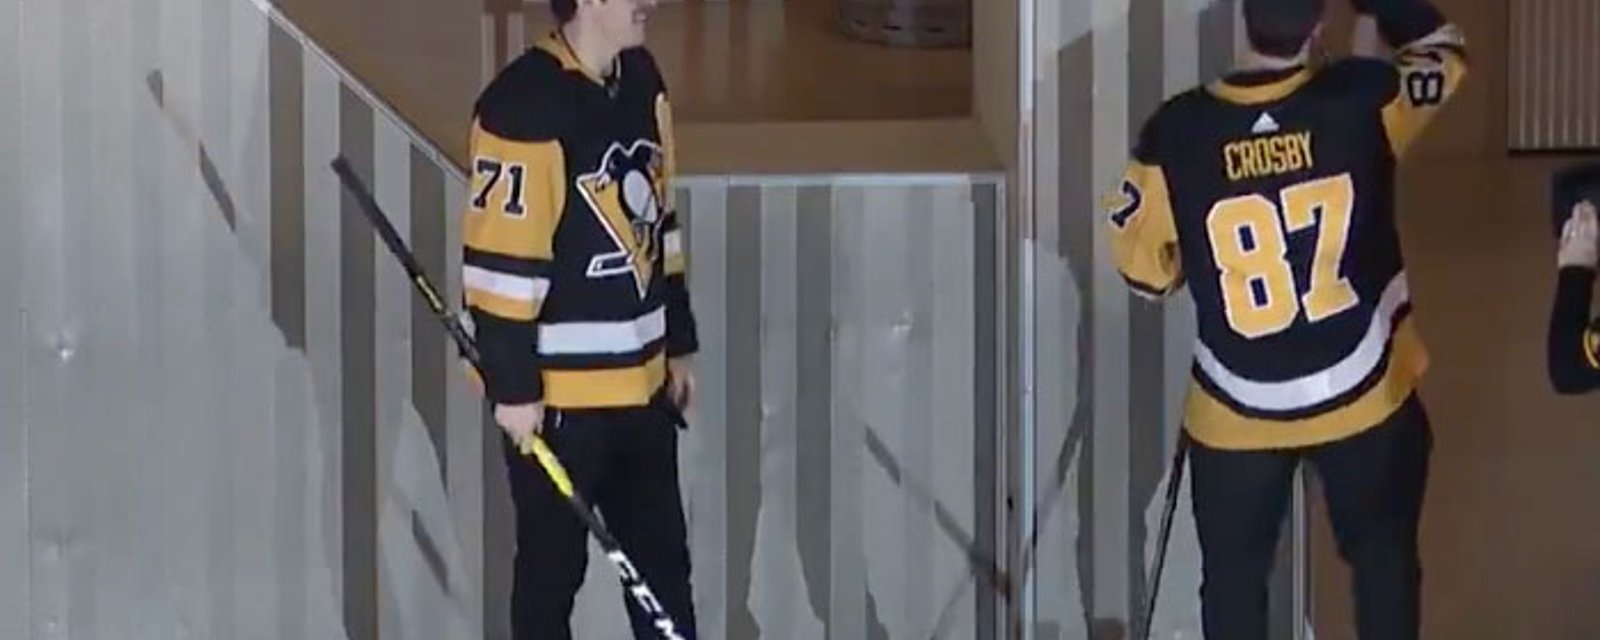 Crosby loses to Malkin in shooting competition and you can see how much it bugs him! 